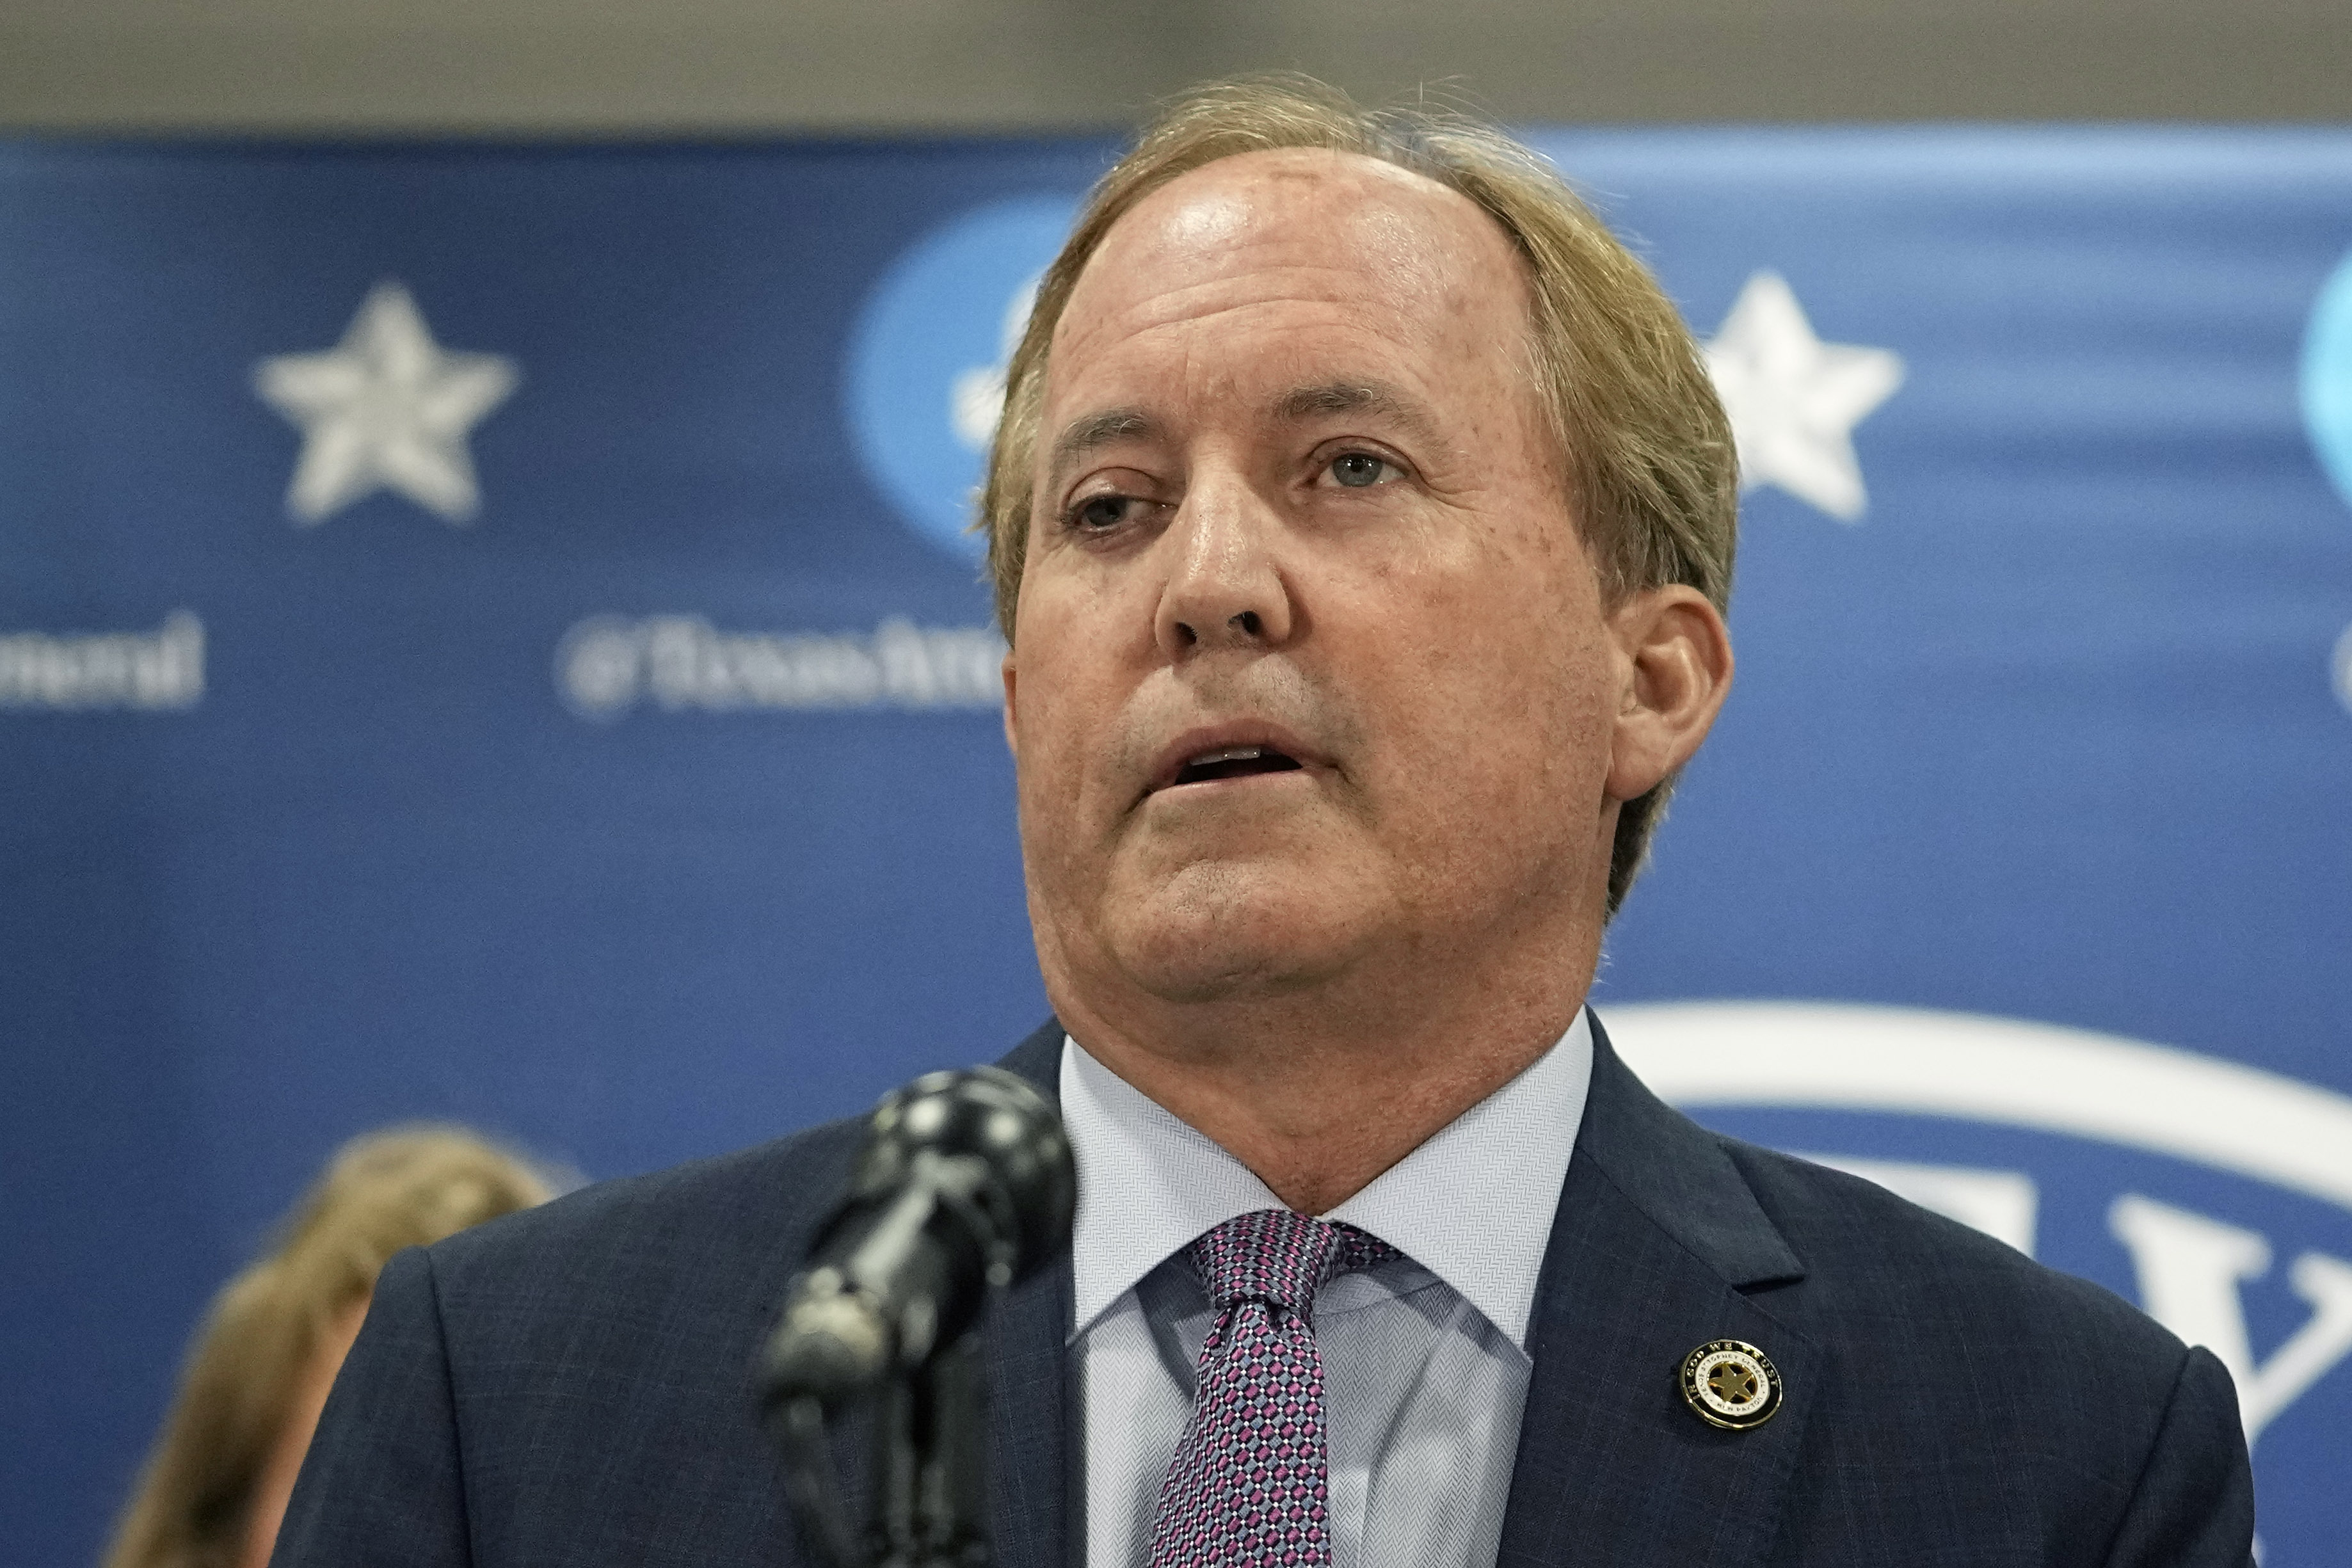 Modtagelig for delikatesse er mere end Ethics rules waived for Texas AG lawyers defending boss, Ken Paxton, in  impeachment trial